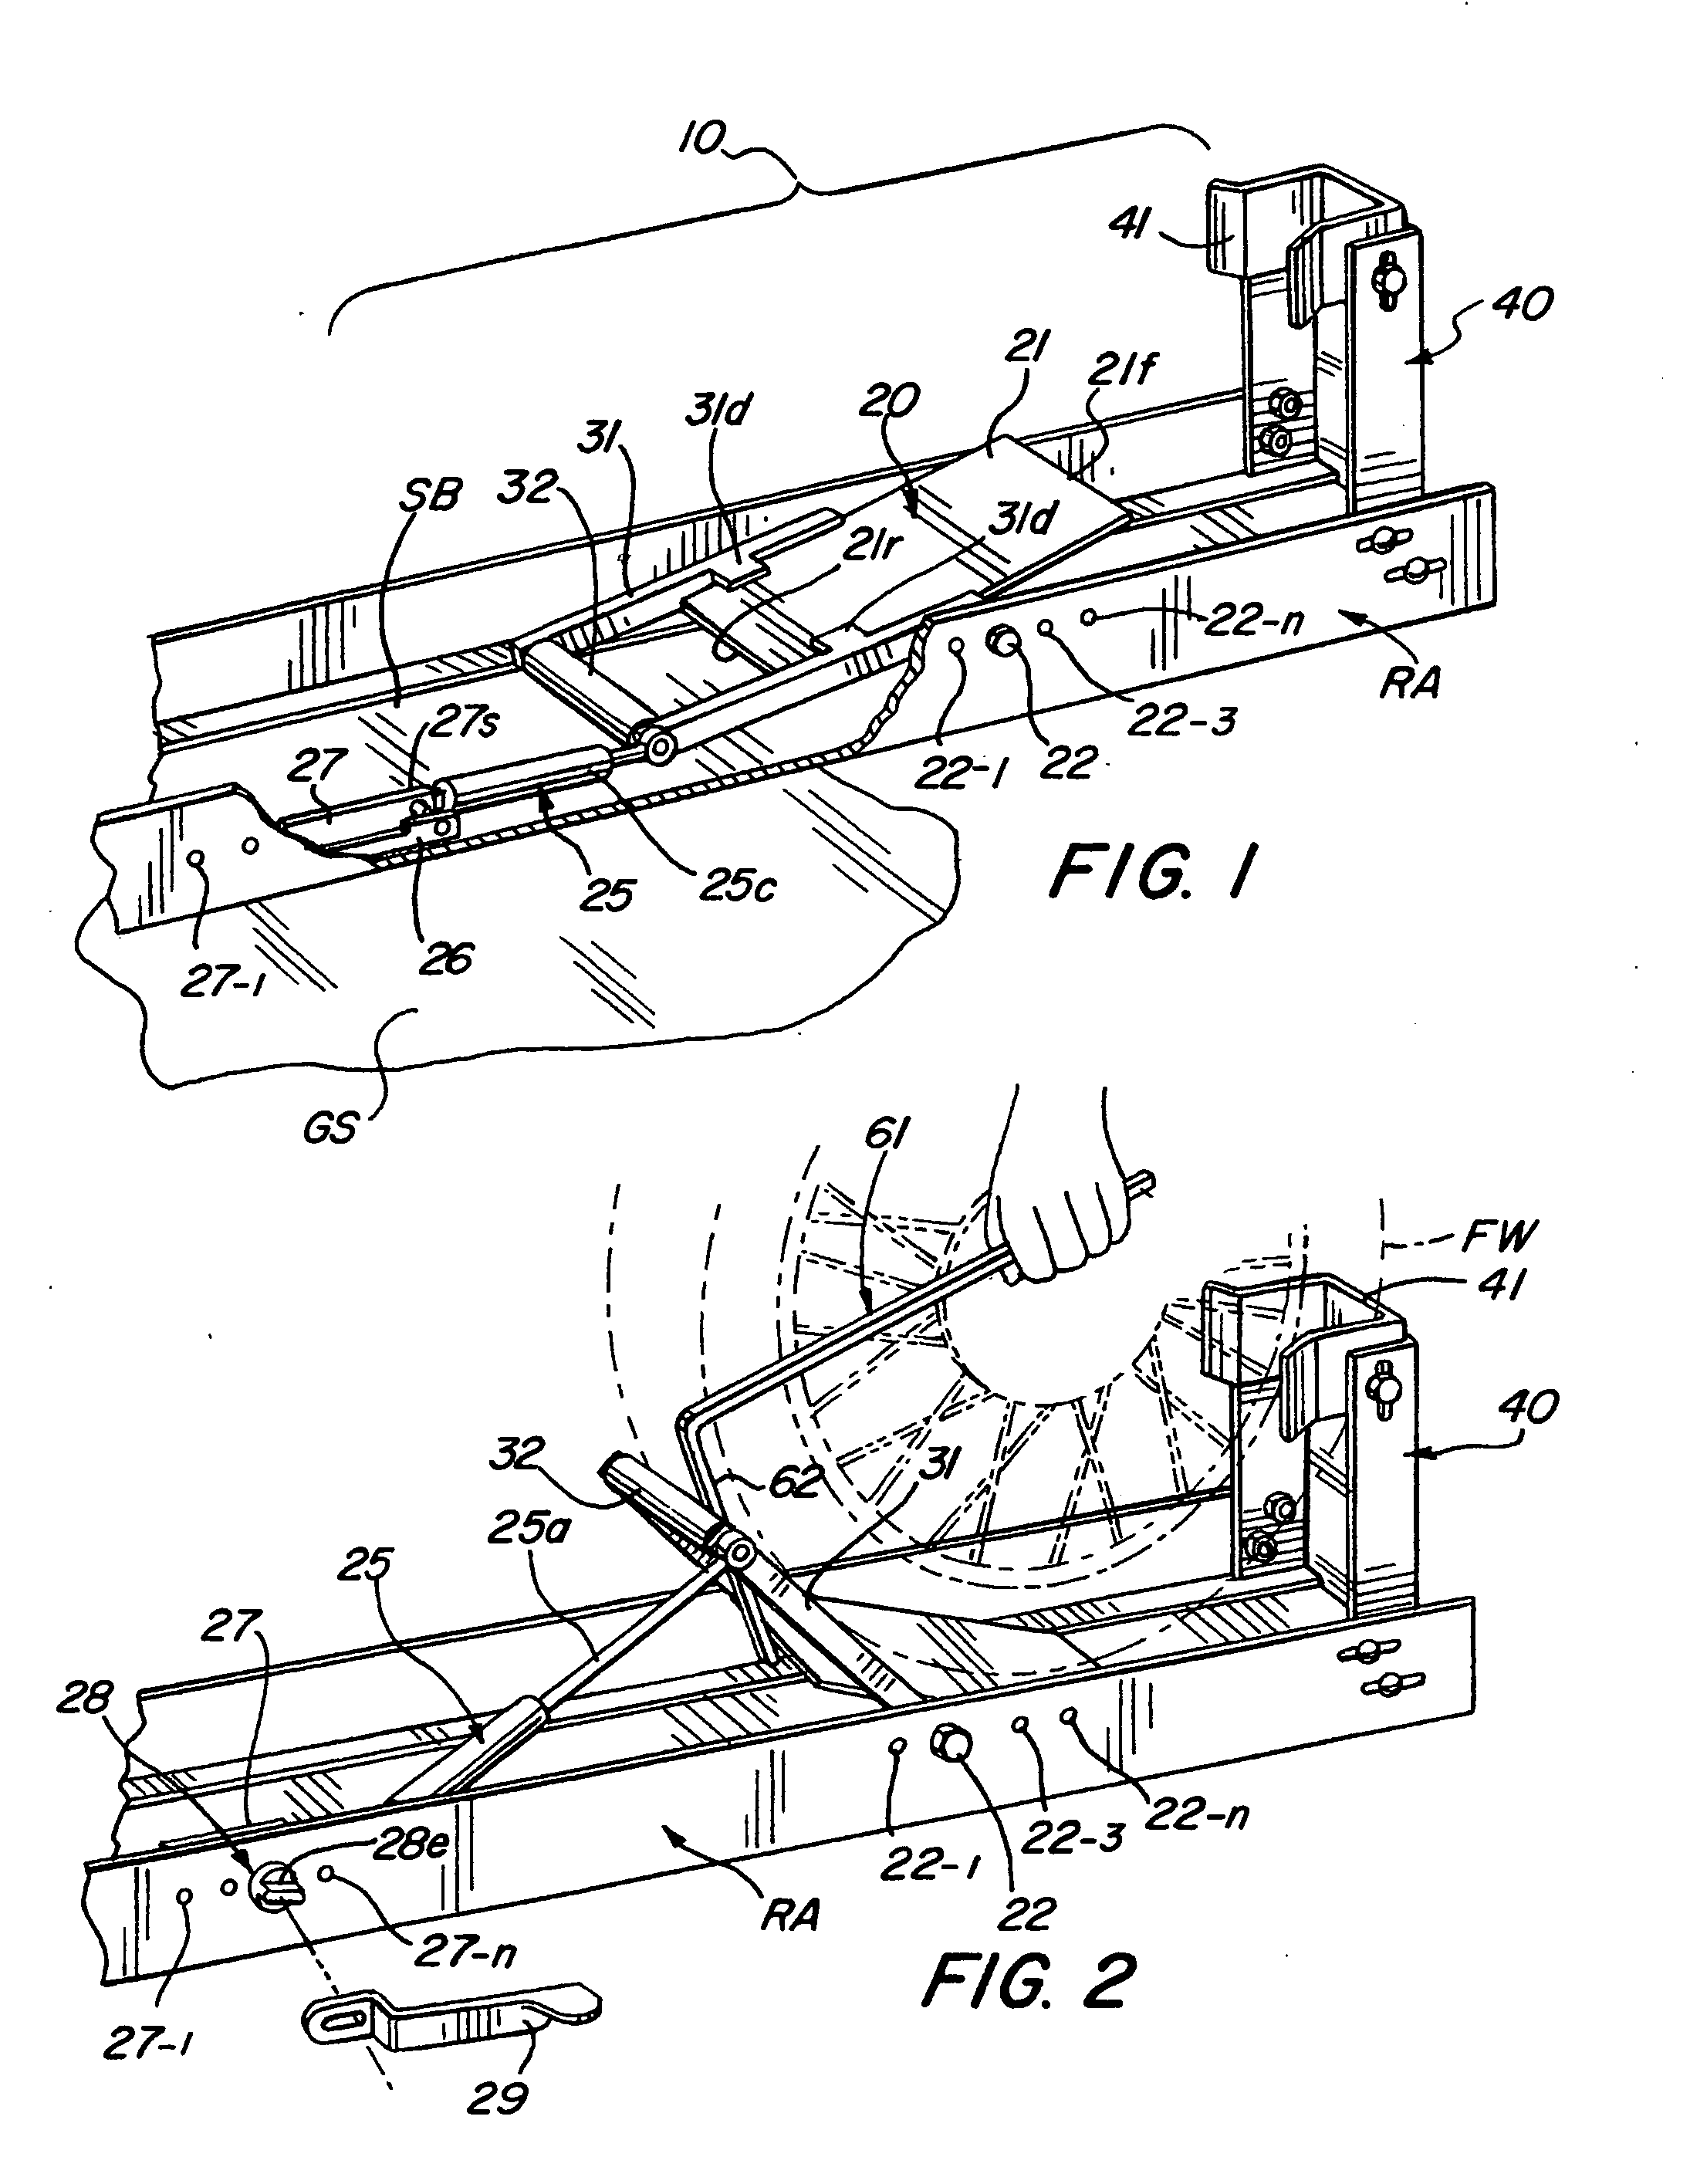 Apparatus for mounting a motorcycle on a carrier